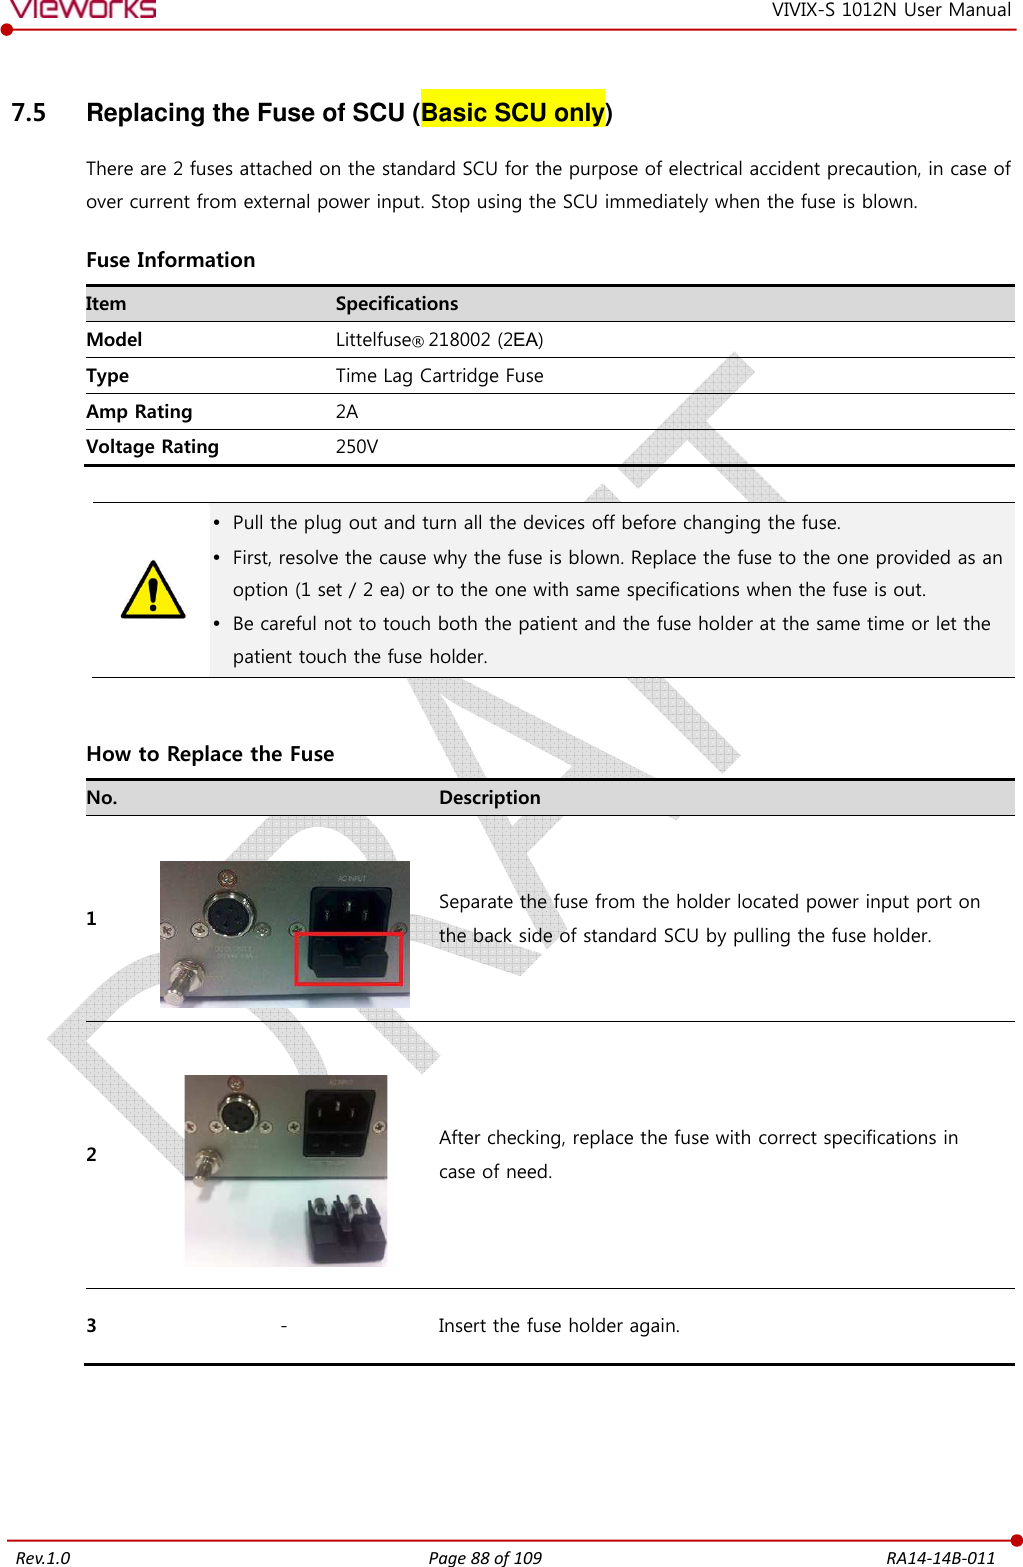   Rev.1.0 Page 88 of 109  RA14-14B-011 VIVIX-S 1012N User Manual 7.5  Replacing the Fuse of SCU (Basic SCU only) There are 2 fuses attached on the standard SCU for the purpose of electrical accident precaution, in case of over current from external power input. Stop using the SCU immediately when the fuse is blown.  Fuse Information Item  Specifications Model  Littelfuse® 218002 (2EA) Type  Time Lag Cartridge Fuse Amp Rating  2A Voltage Rating  250V    Pull the plug out and turn all the devices off before changing the fuse.  First, resolve the cause why the fuse is blown. Replace the fuse to the one provided as an option (1 set / 2 ea) or to the one with same specifications when the fuse is out.  Be careful not to touch both the patient and the fuse holder at the same time or let the patient touch the fuse holder.   How to Replace the Fuse No.   Description 1   Separate the fuse from the holder located power input port on   the back side of standard SCU by pulling the fuse holder. 2   After checking, replace the fuse with correct specifications in   case of need. 3  -  Insert the fuse holder again.   